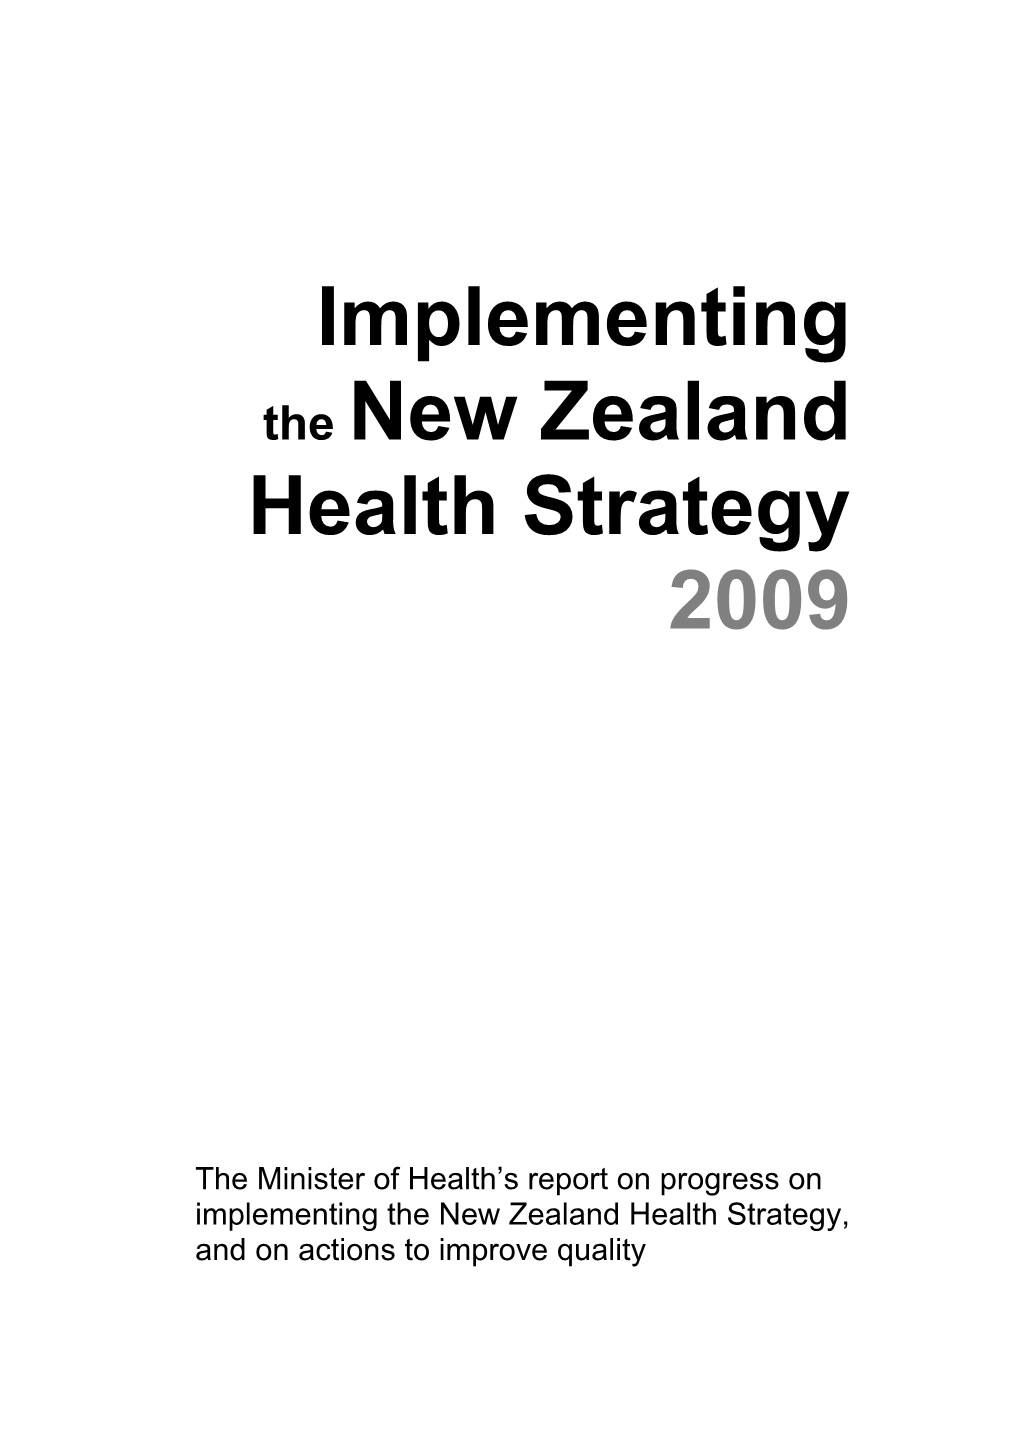 Implementing the New Zealand Health Strategy 2009